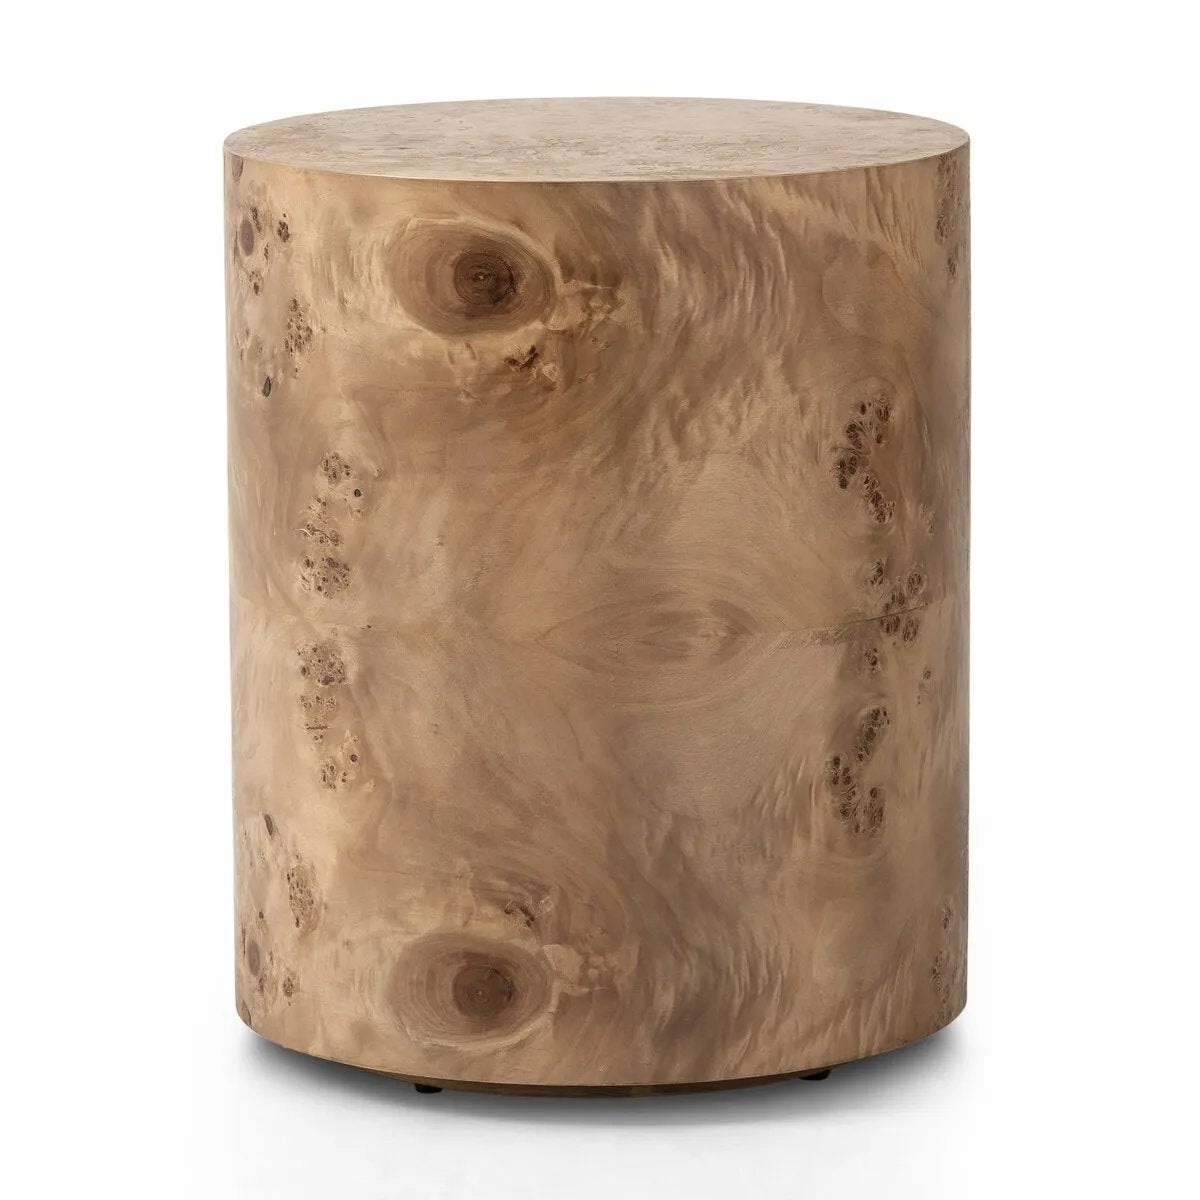 A simple drum shape showcases the natural artistry of the richly grained caramel burl veneer. Its compact size is ideal for smaller spaces.Collection: Hughe Amethyst Home provides interior design, new home construction design consulting, vintage area rugs, and lighting in the Omaha metro area.